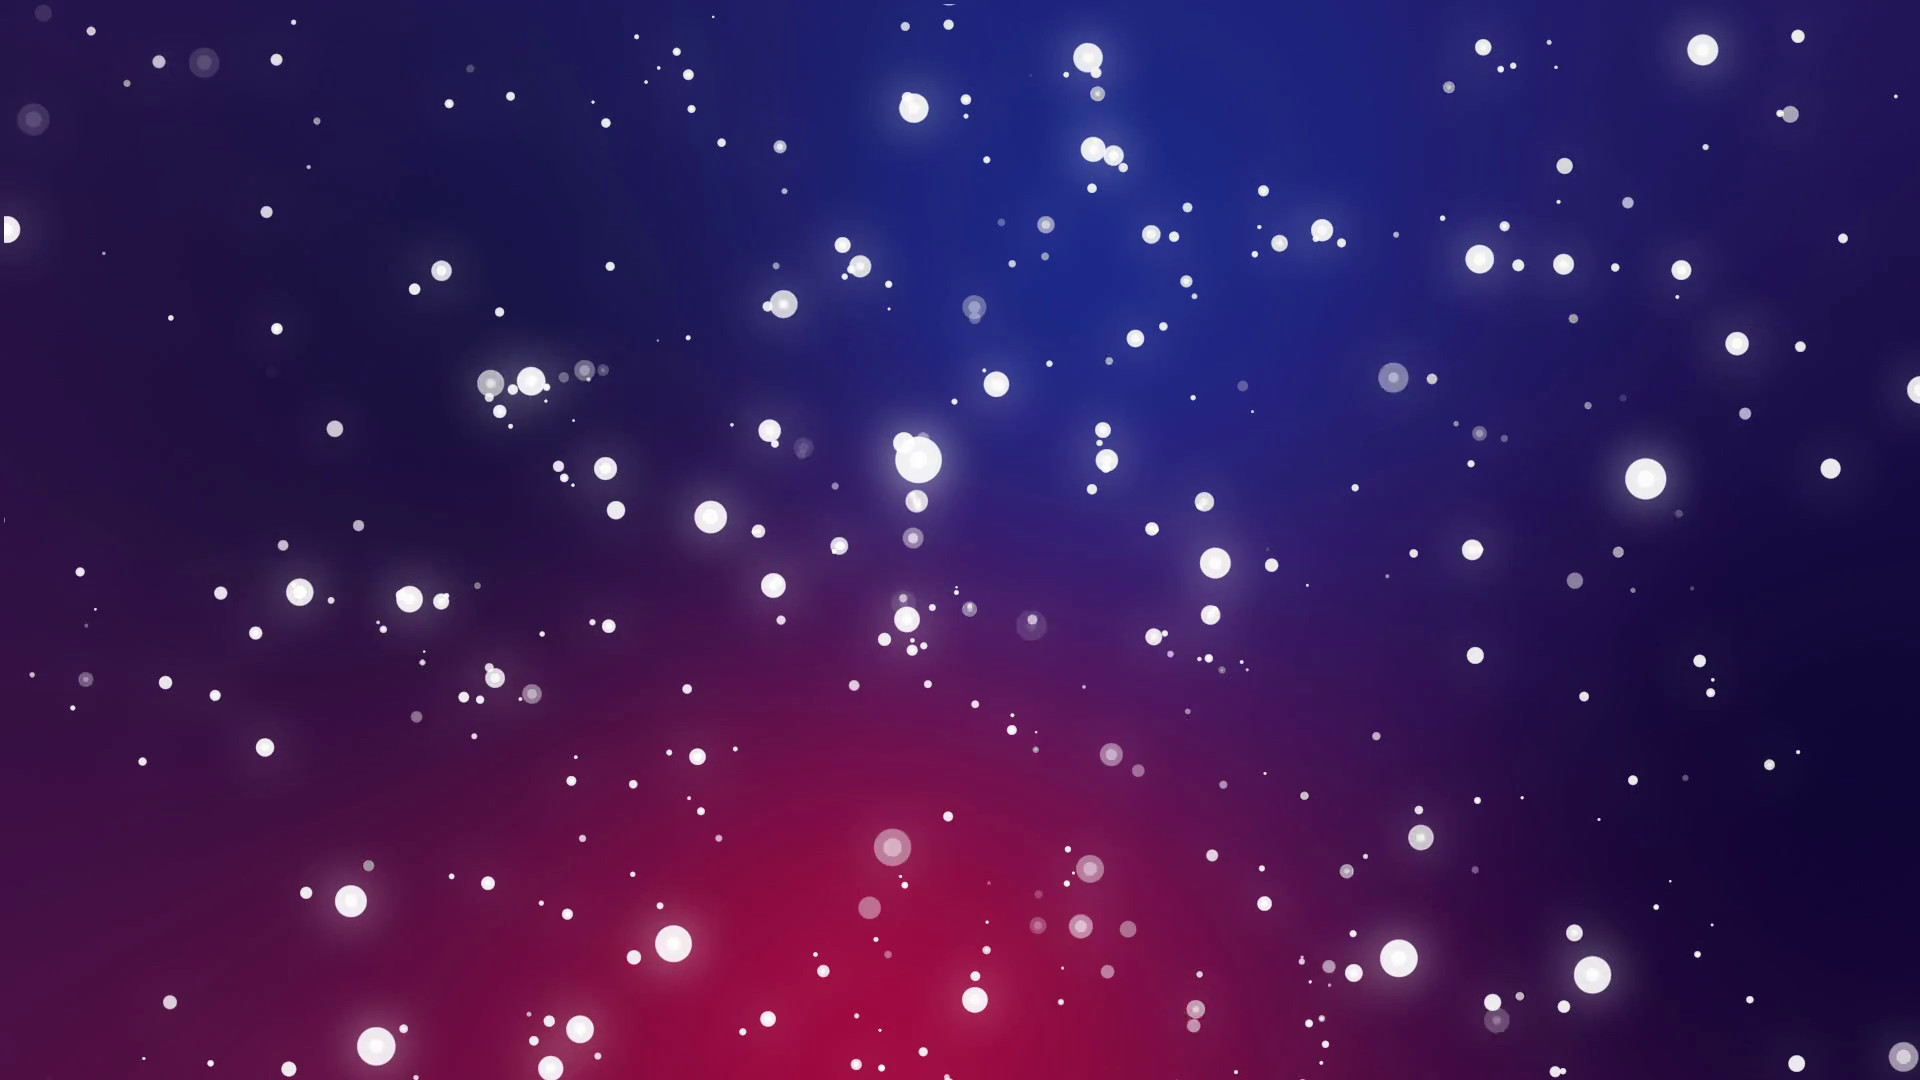 1920x1080 Festive Christmas starry night sky animation with glowing white dot  particles flickering on a dark blue purple pink gradient background Motion  Background - ...